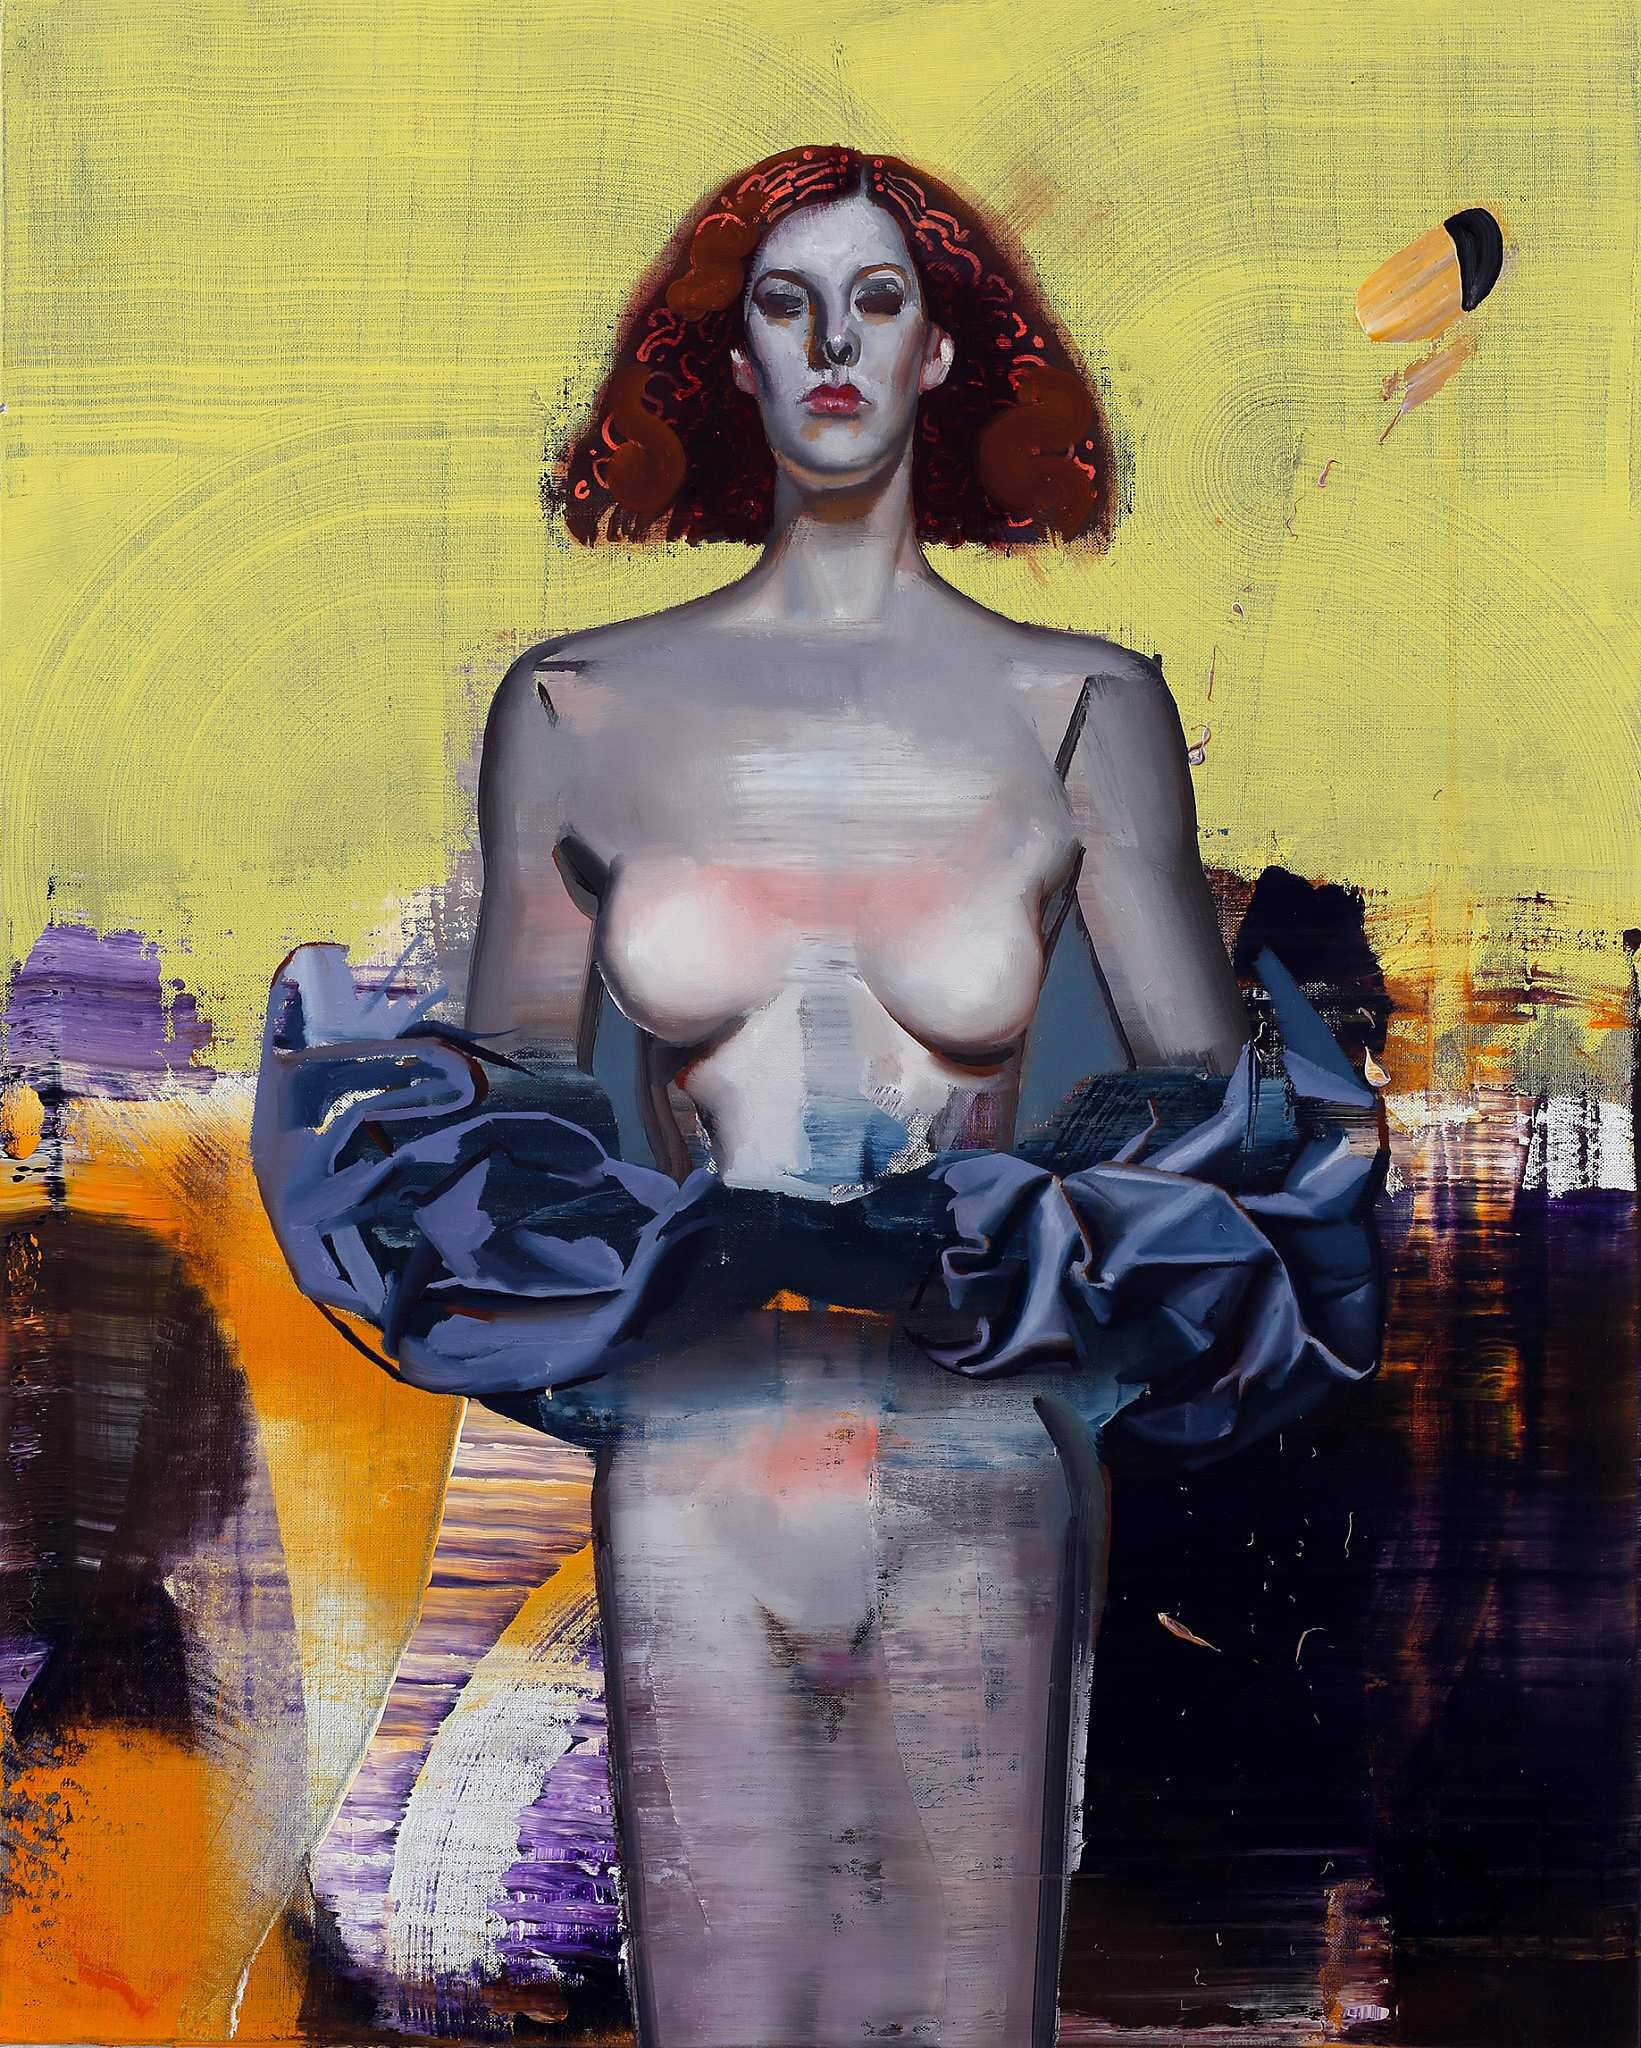 Statue, 100 × 80 cm, Oil and Acrylic on Canvas, 2020